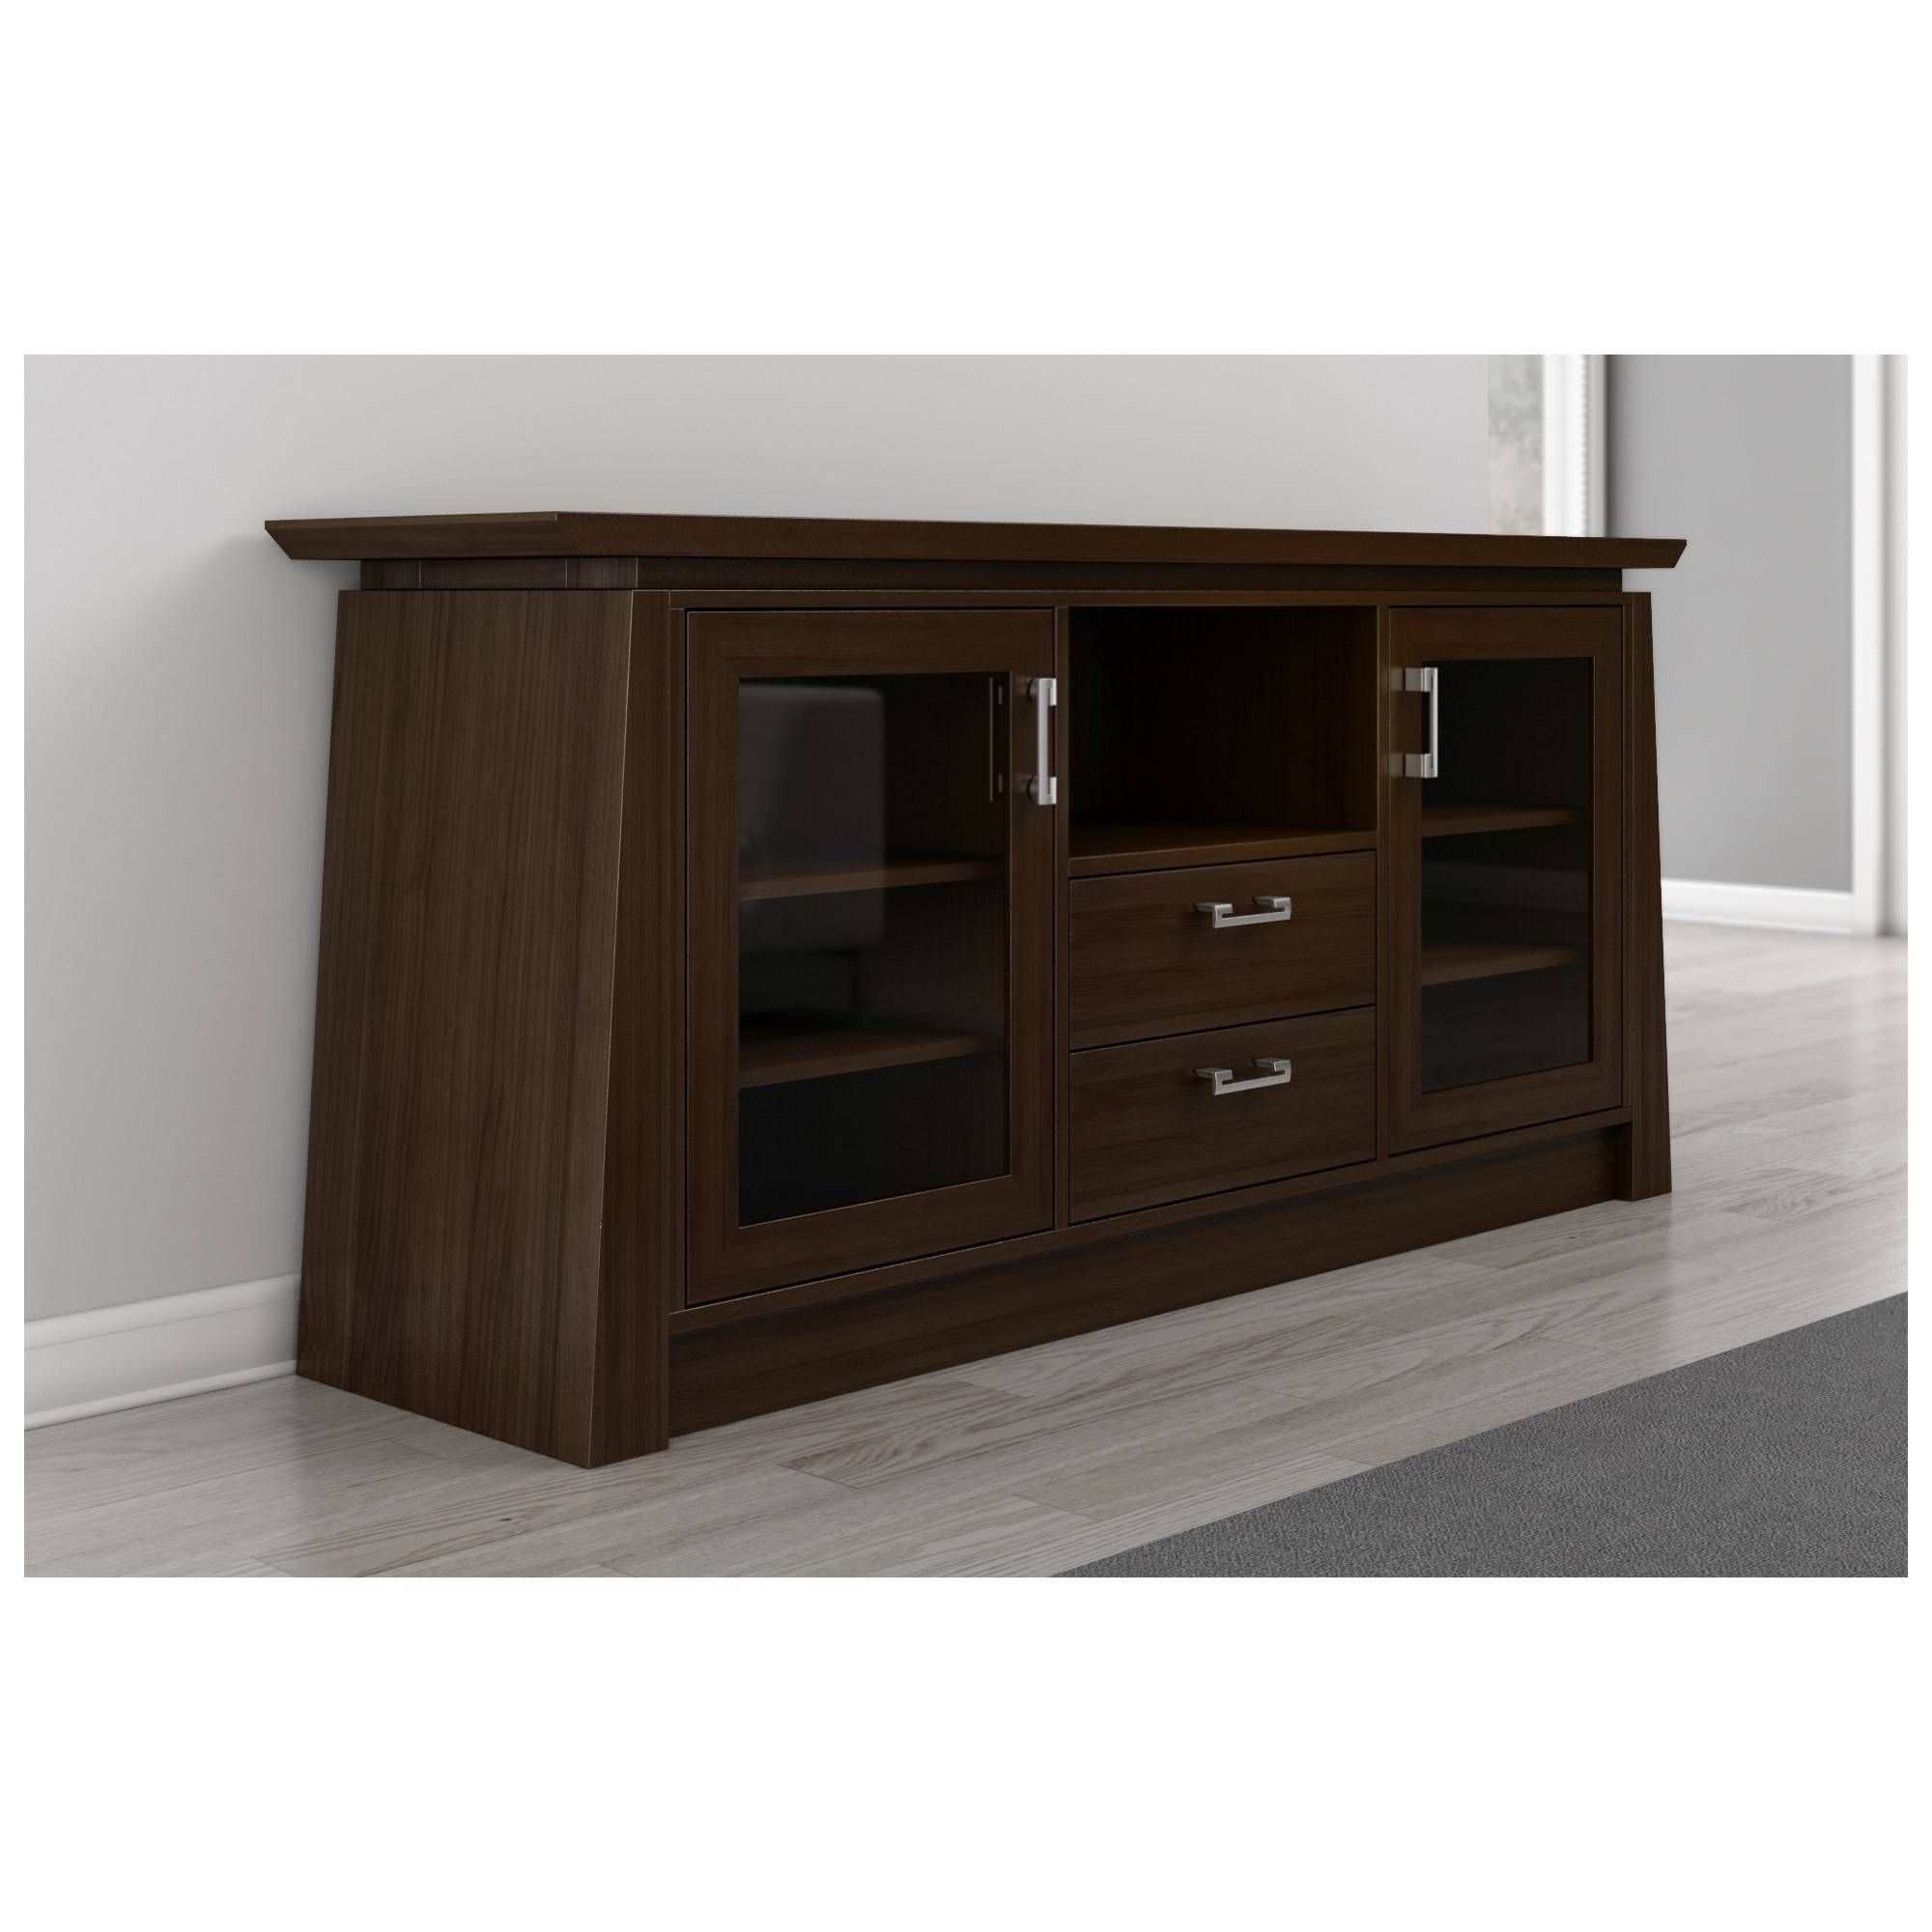 Furnitech Elegante 70" Tv Stand Asian Style Media Cabinet W Inside Asian Tv Cabinets (View 1 of 15)